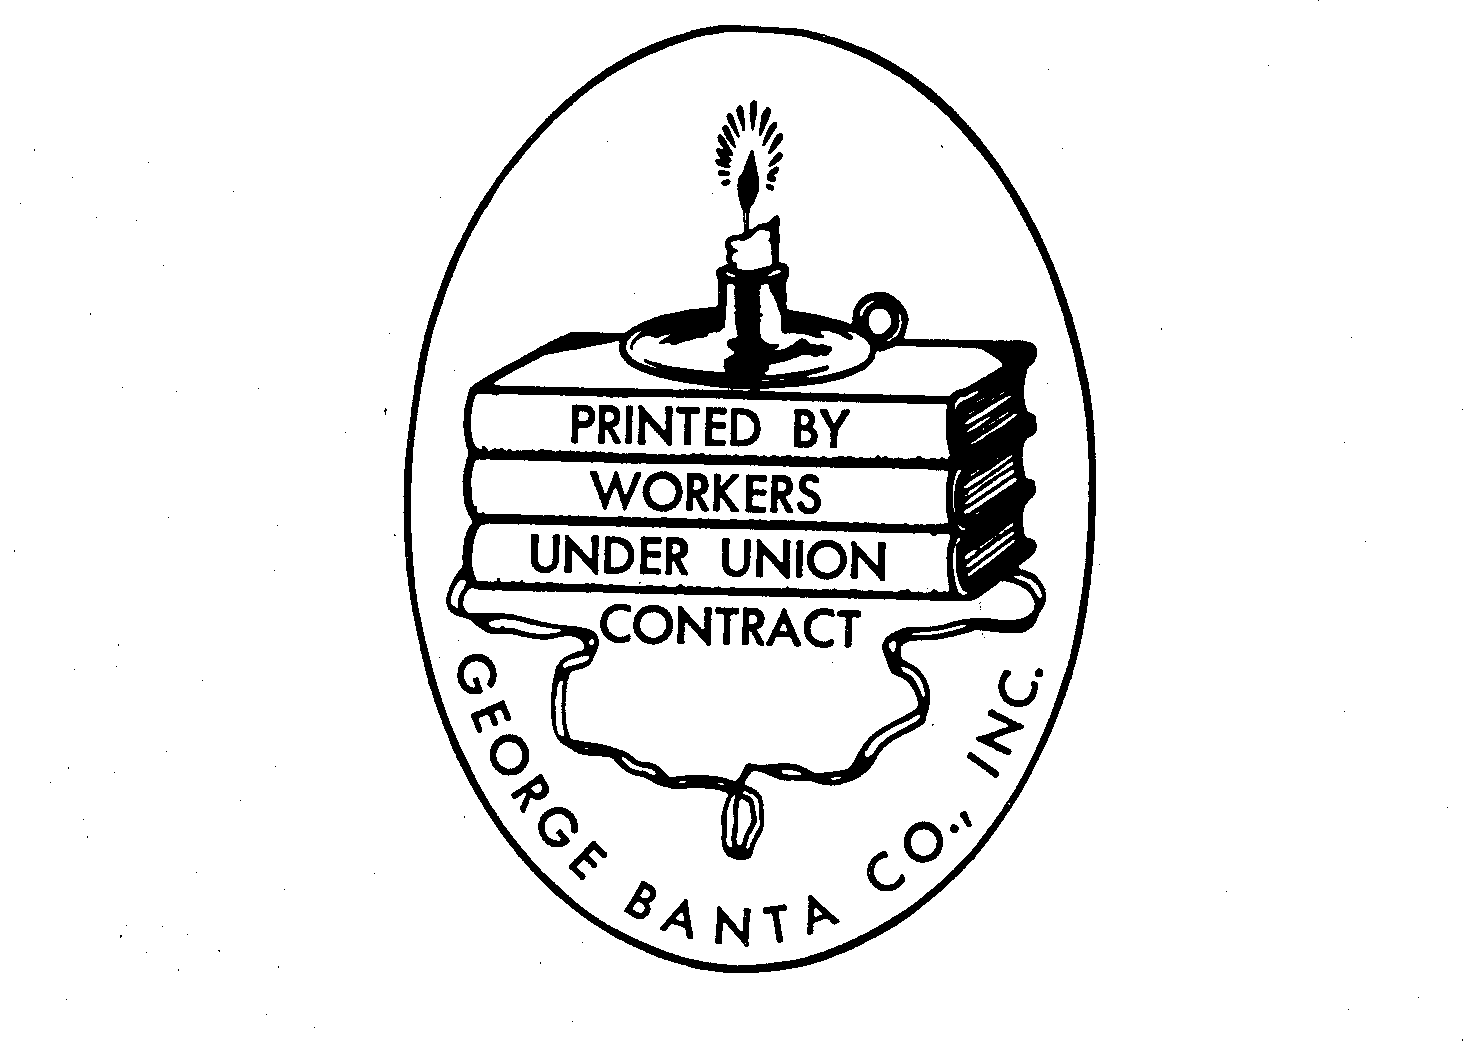  PRINTED BY WORKERS UNDER UNION CONTRACT GEORGE BANTA CO. INC.